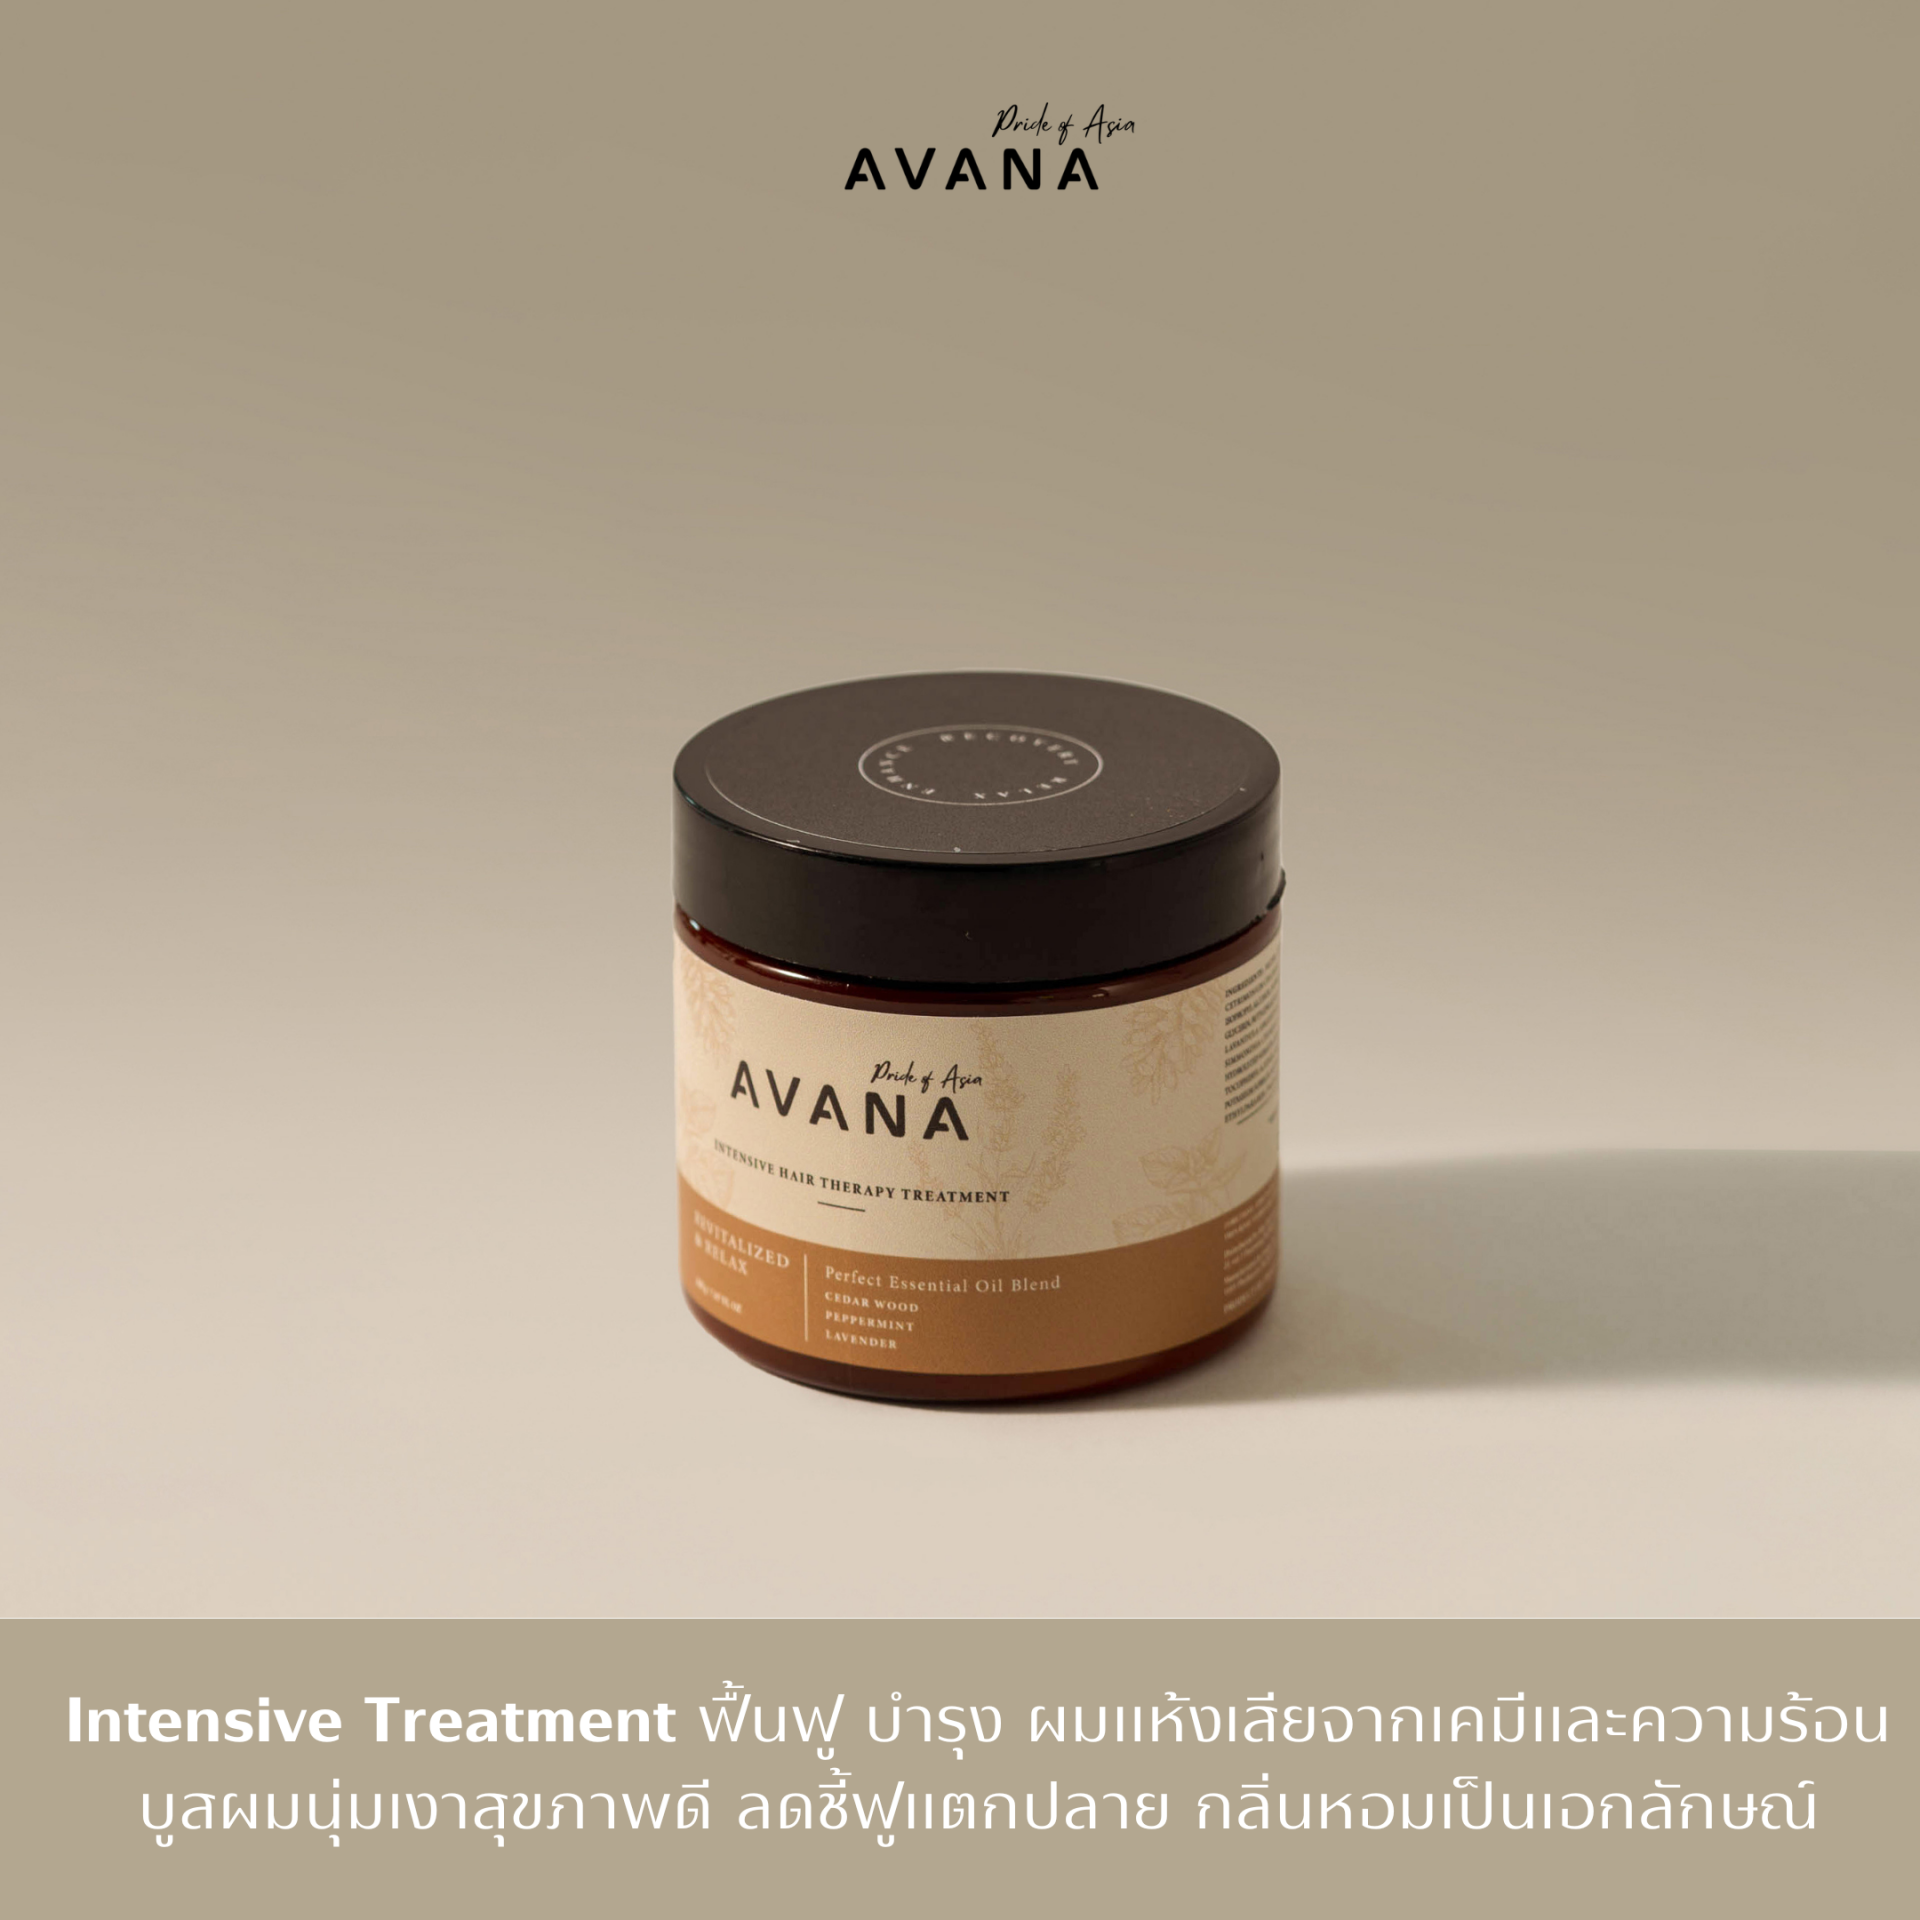 AVANA Intensive hair therapy treatment